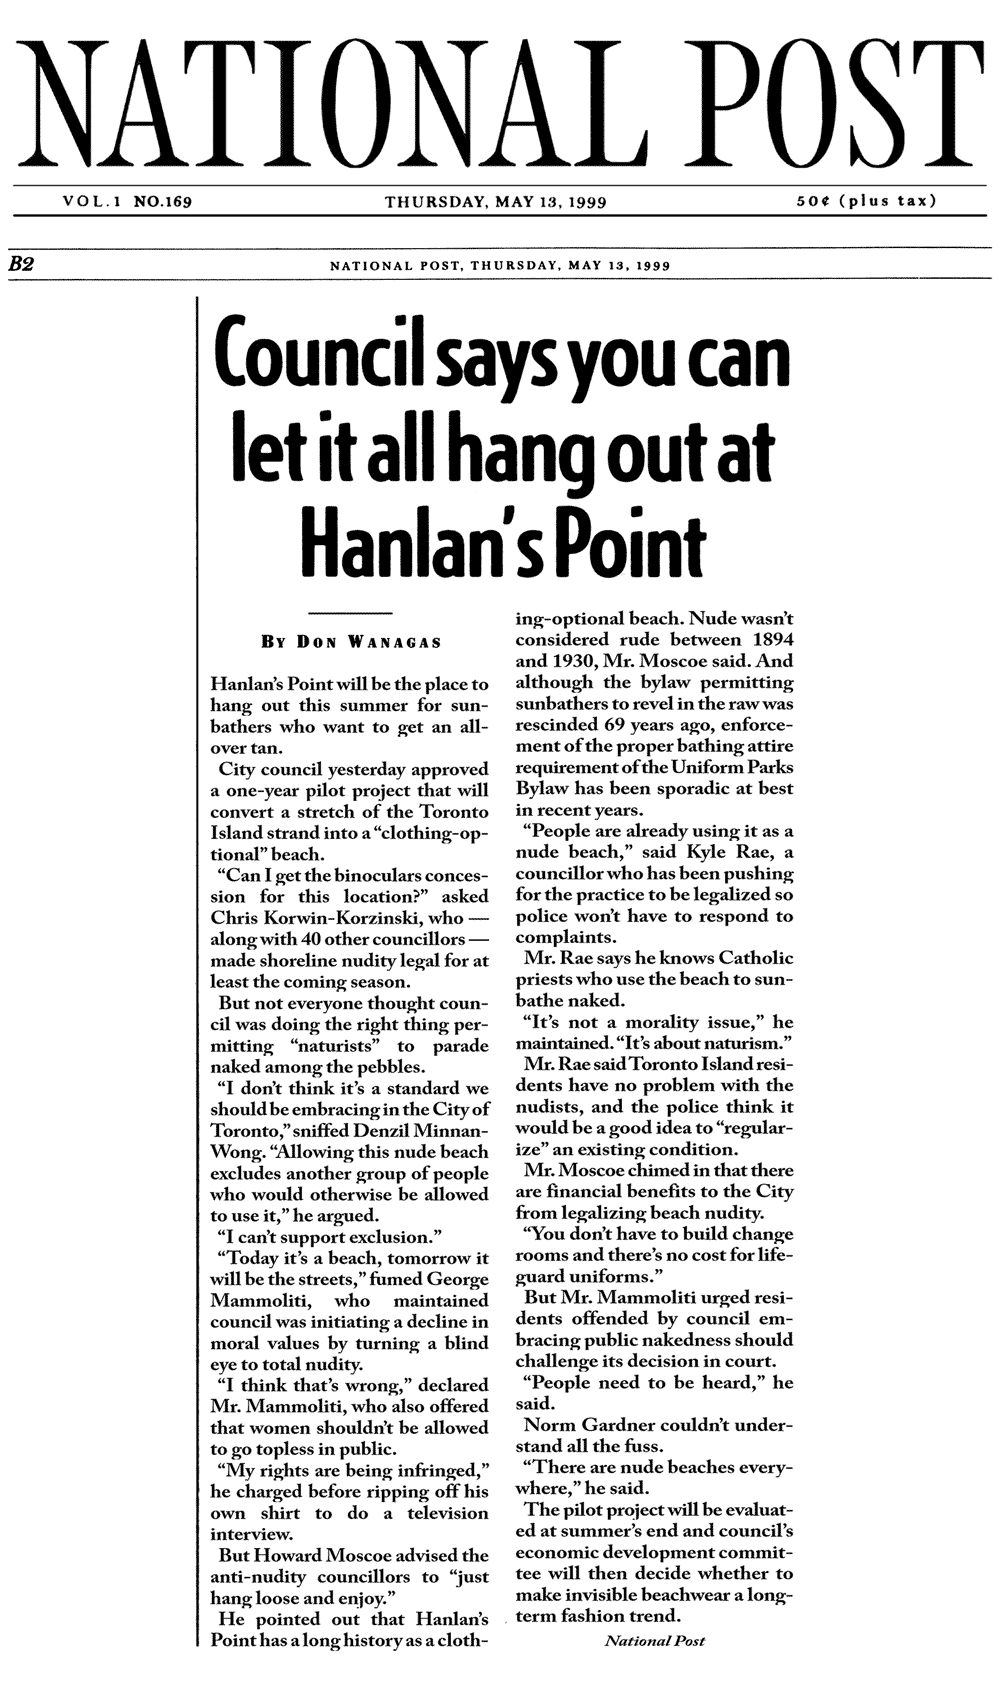 National Post 1999-05-13 pB2 - Simm convinces Toronto Council to create official Clothing-Optional Zone at Hanlan’s Point